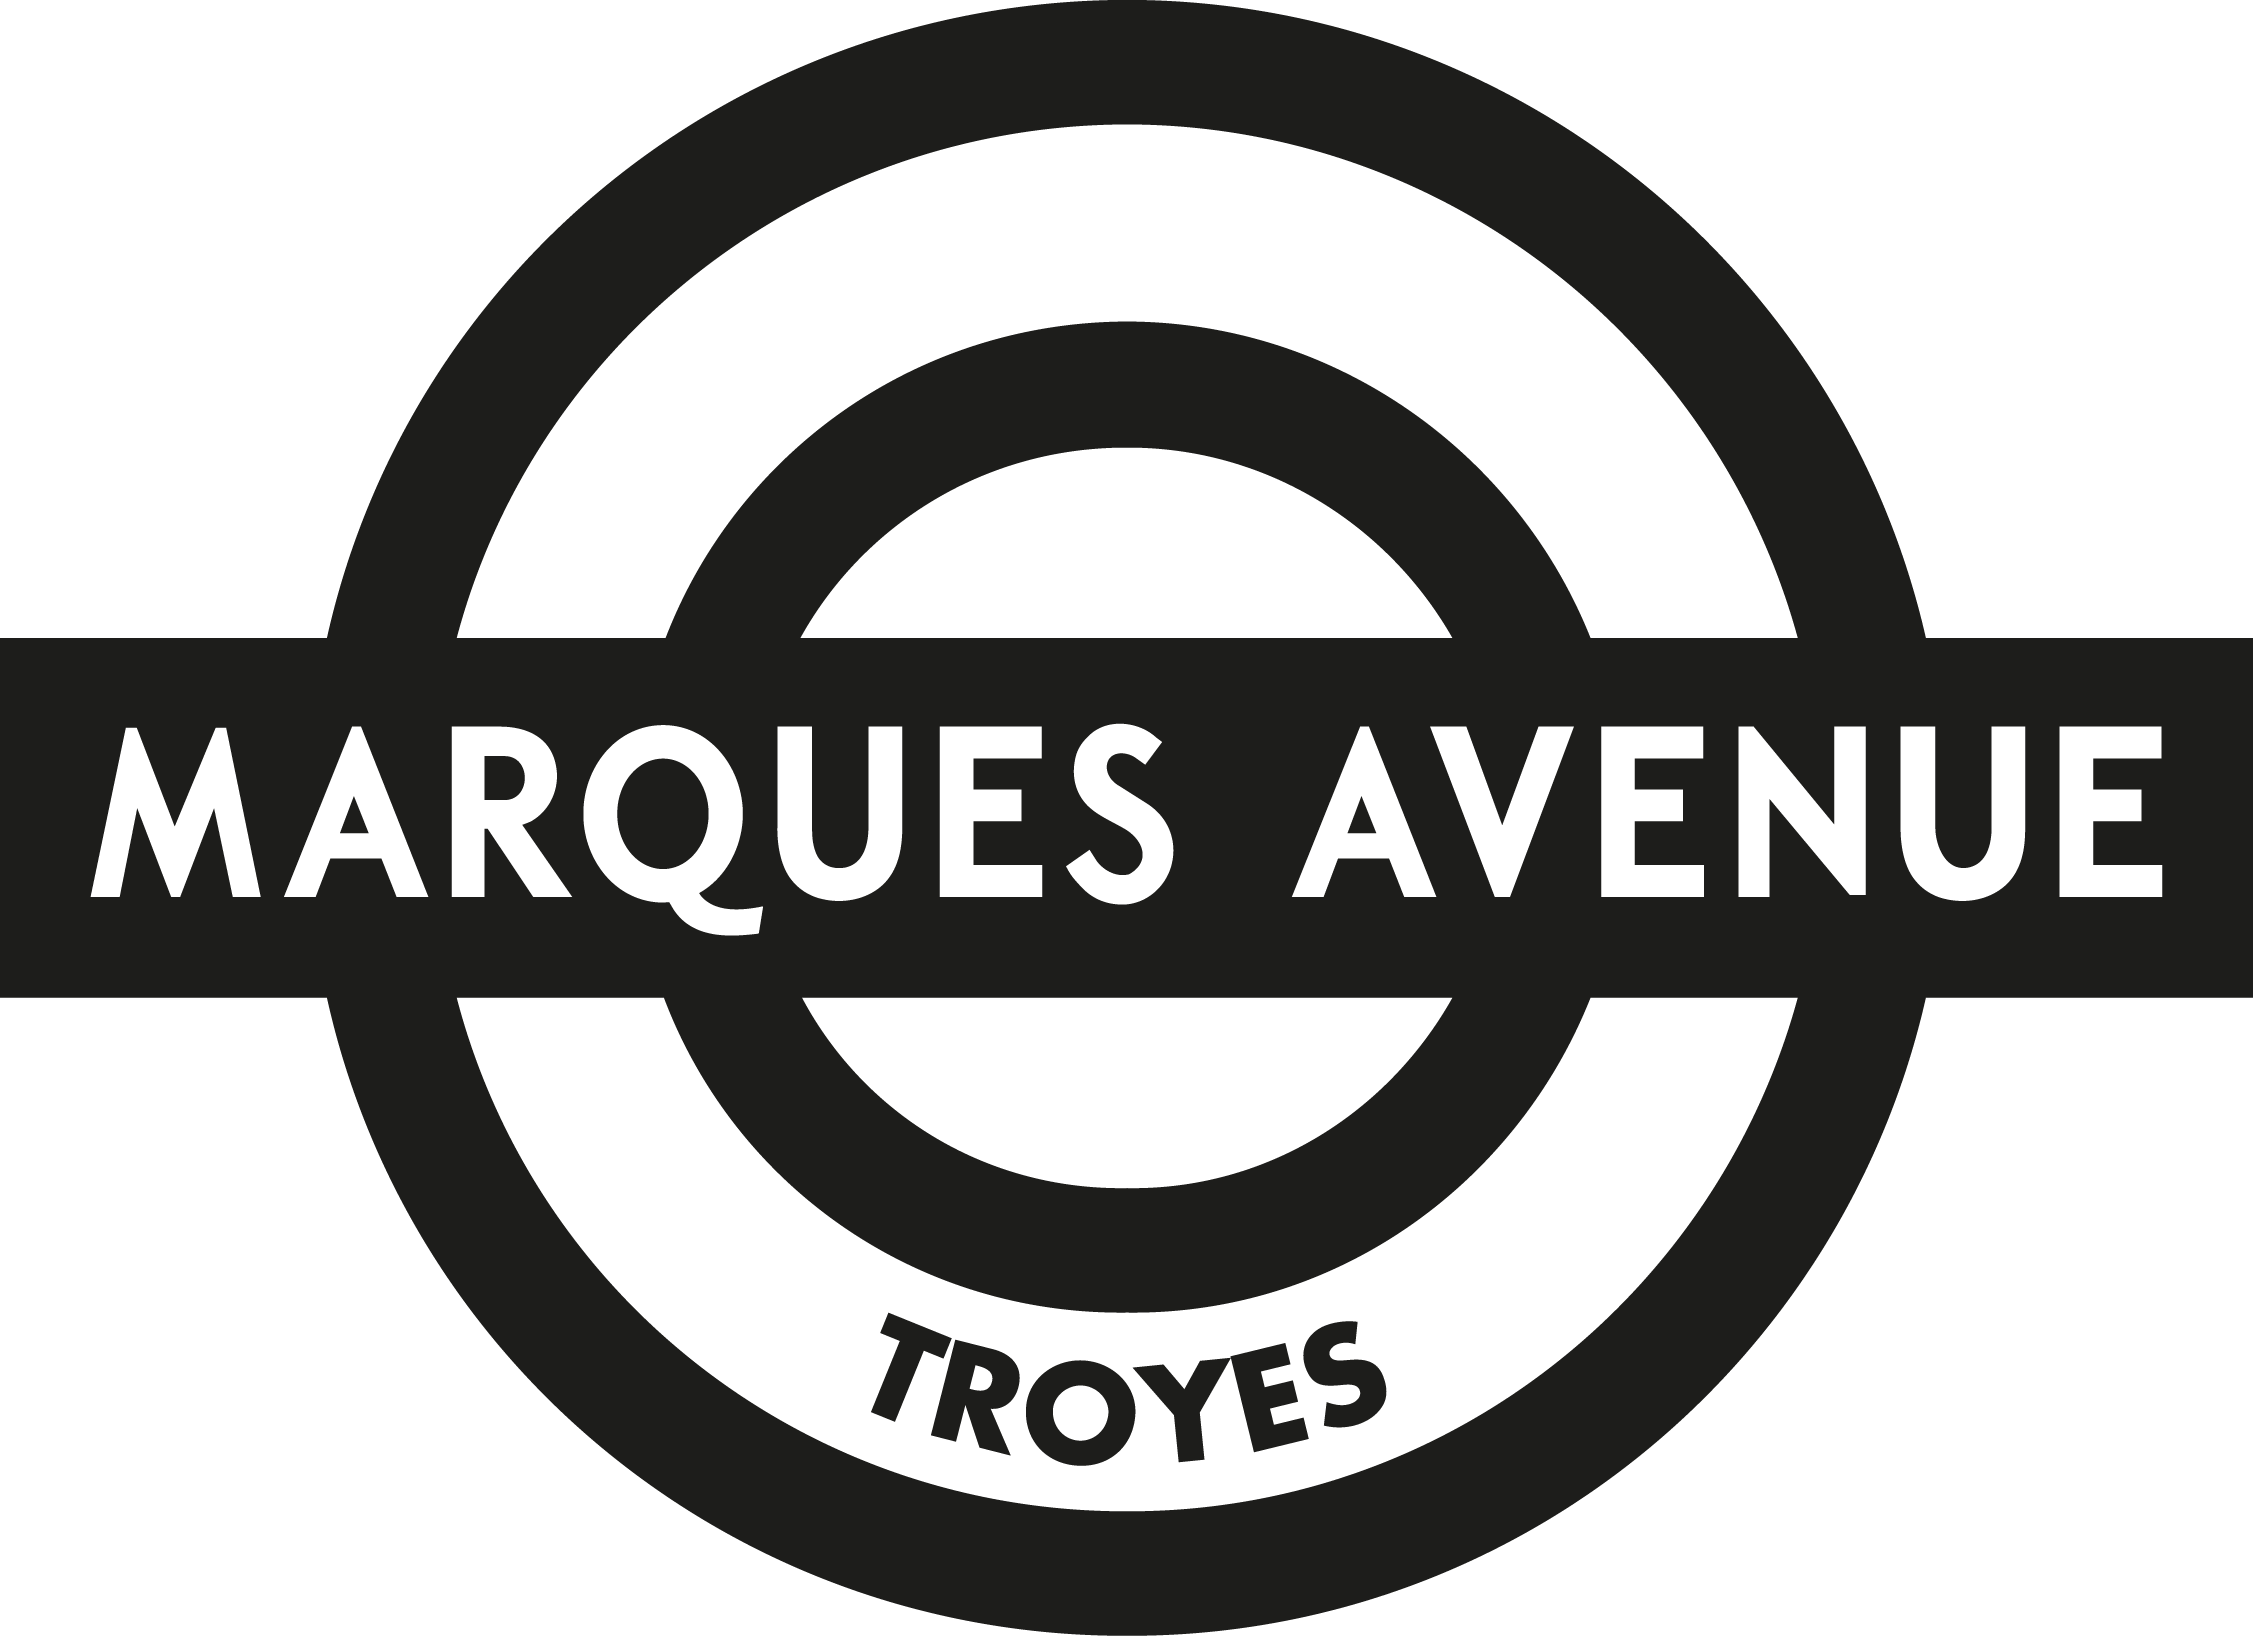 marque avenue troyes lacoste